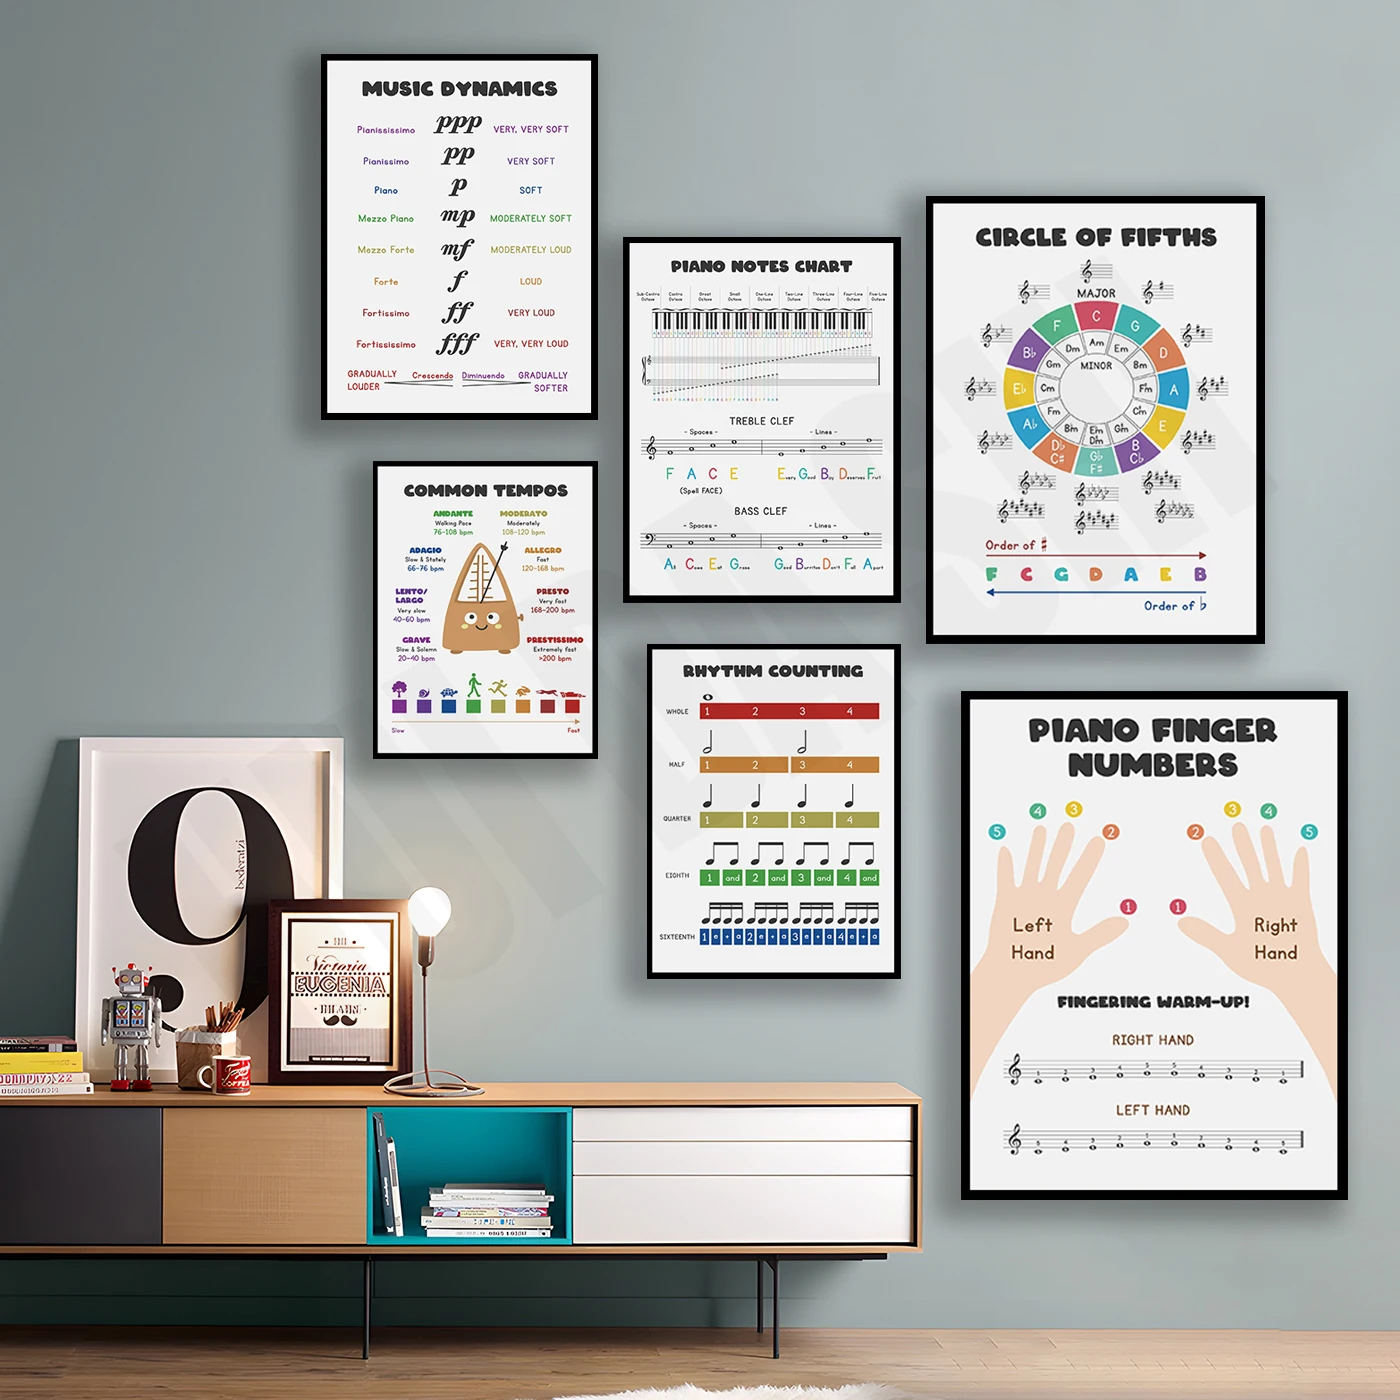 Piano Music Theory Posters, Set of 12 Music Educational Wall Art, Music  Room Decor, Circle of Fifths, Note Rest Values, Tempo, Piano Chords 